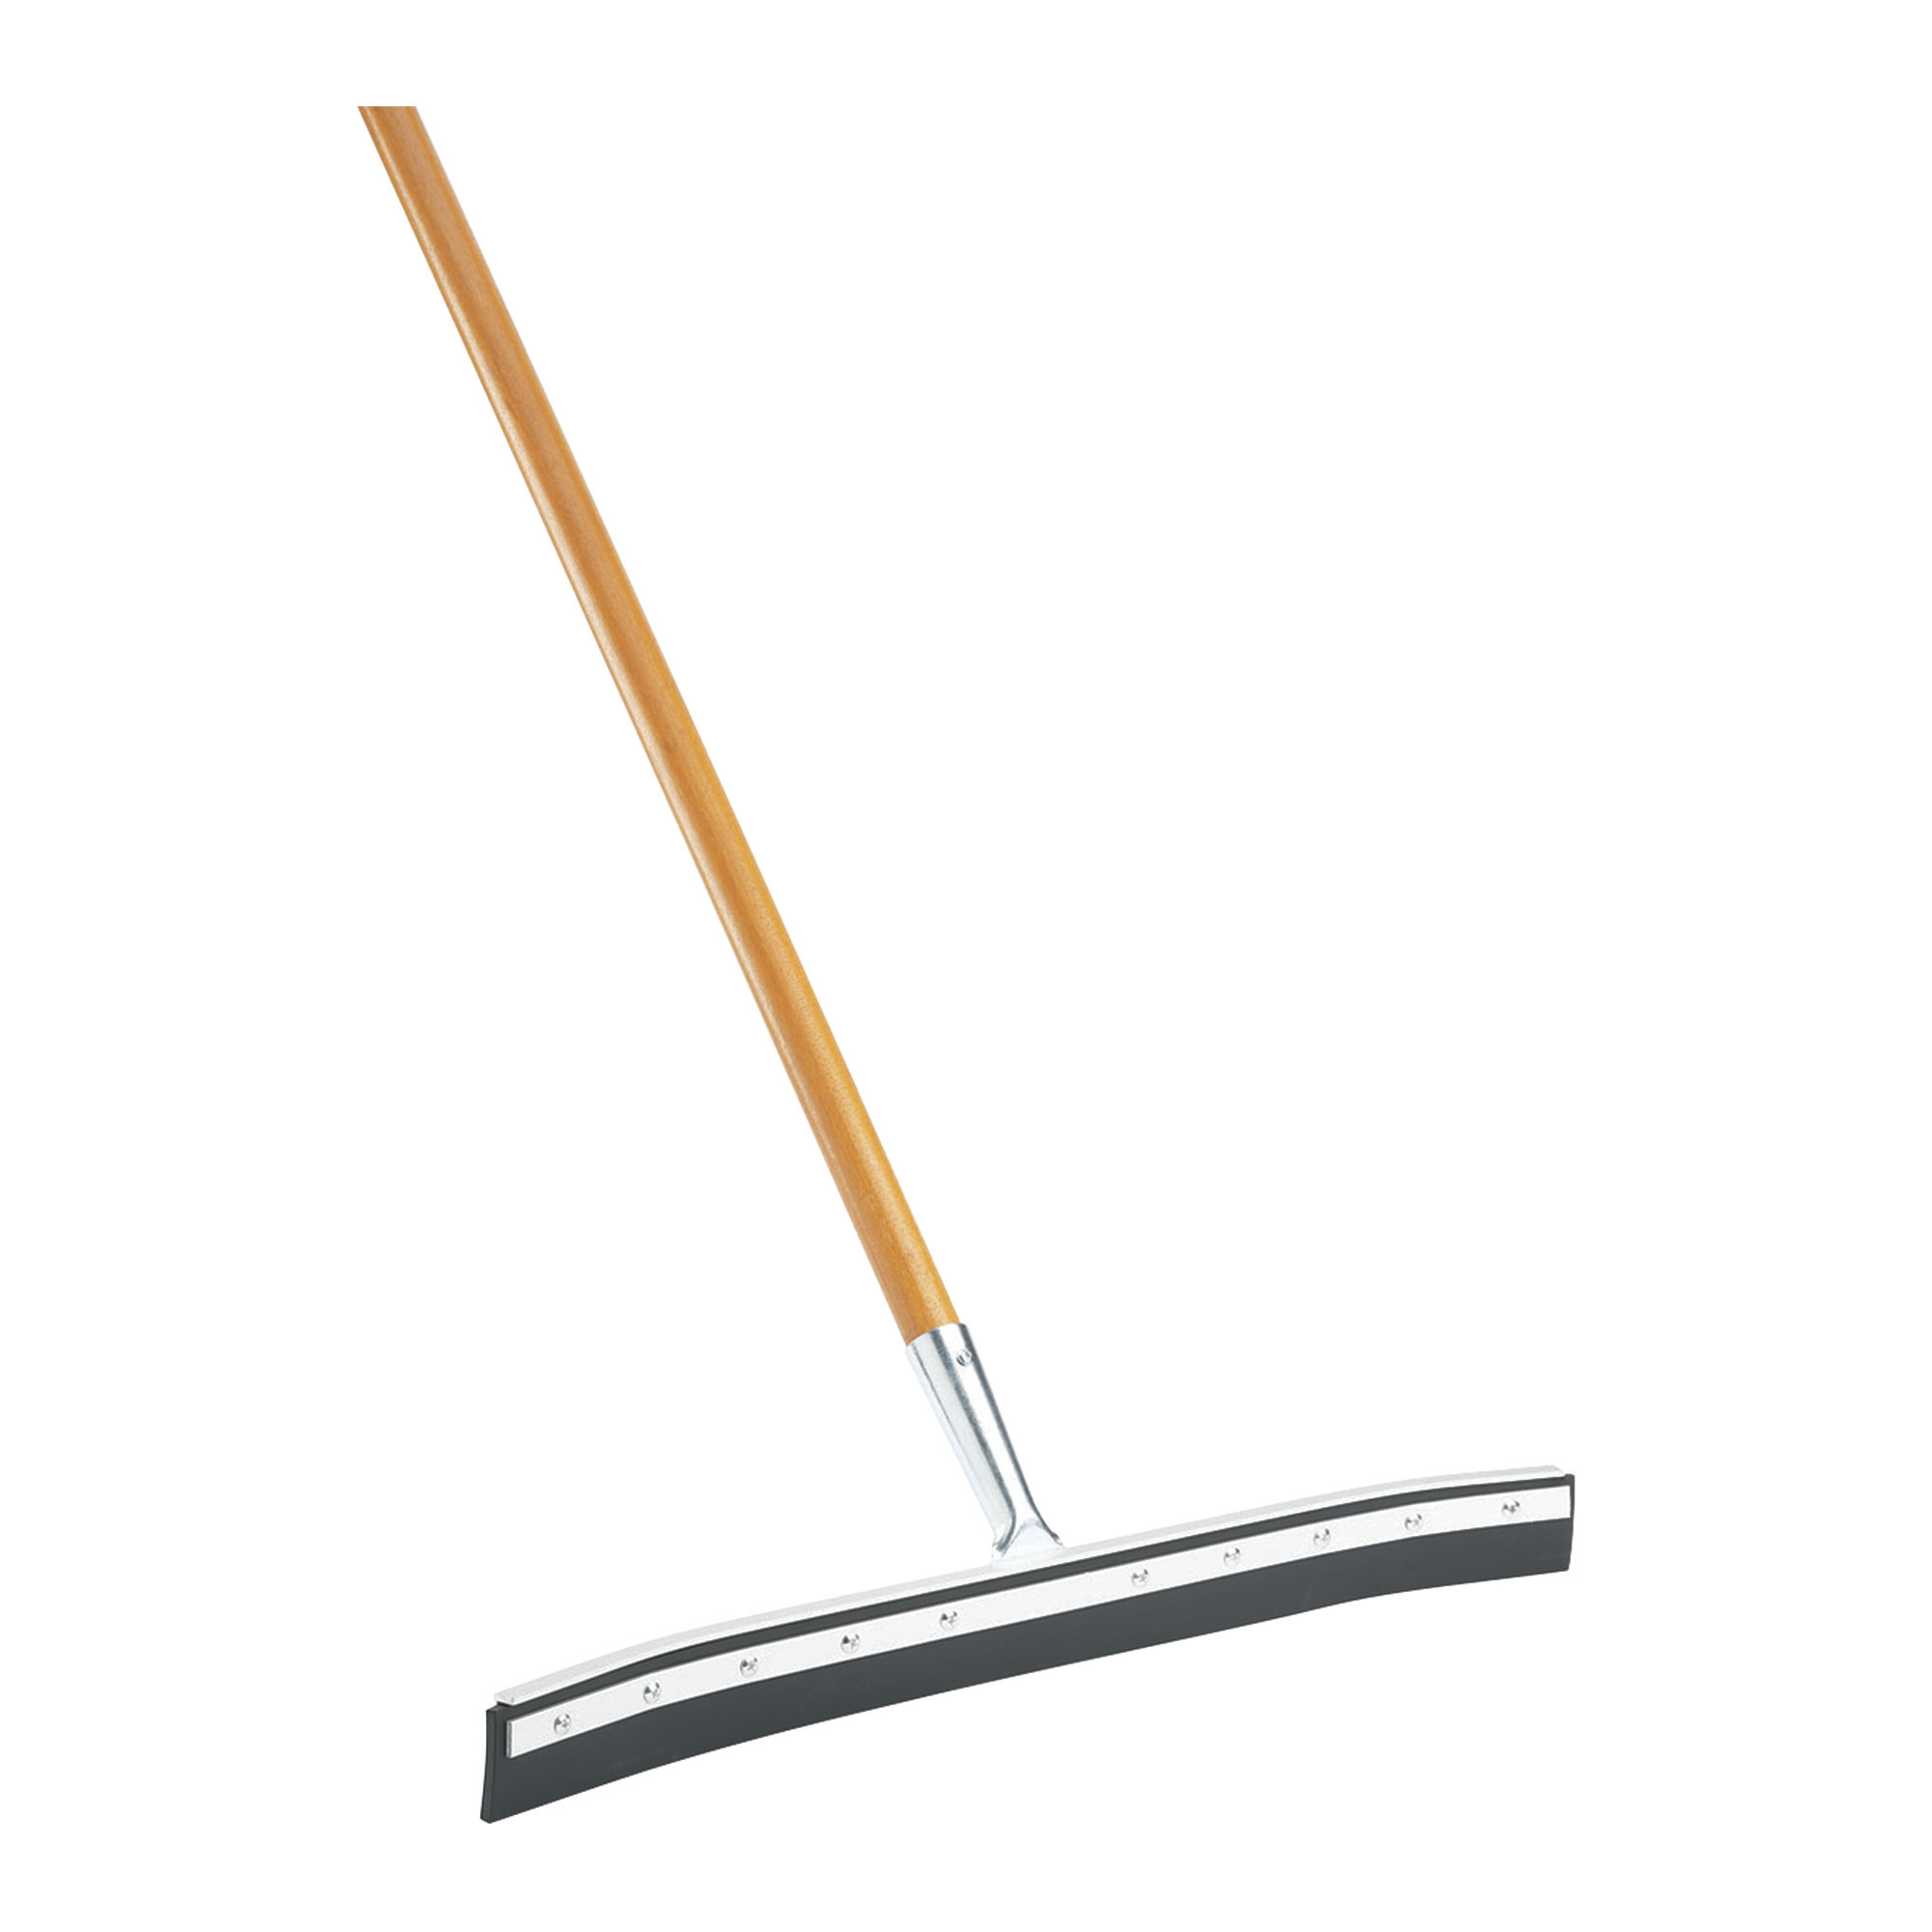 Libman 24 in. Curved Floor Squeegee with Handle 542